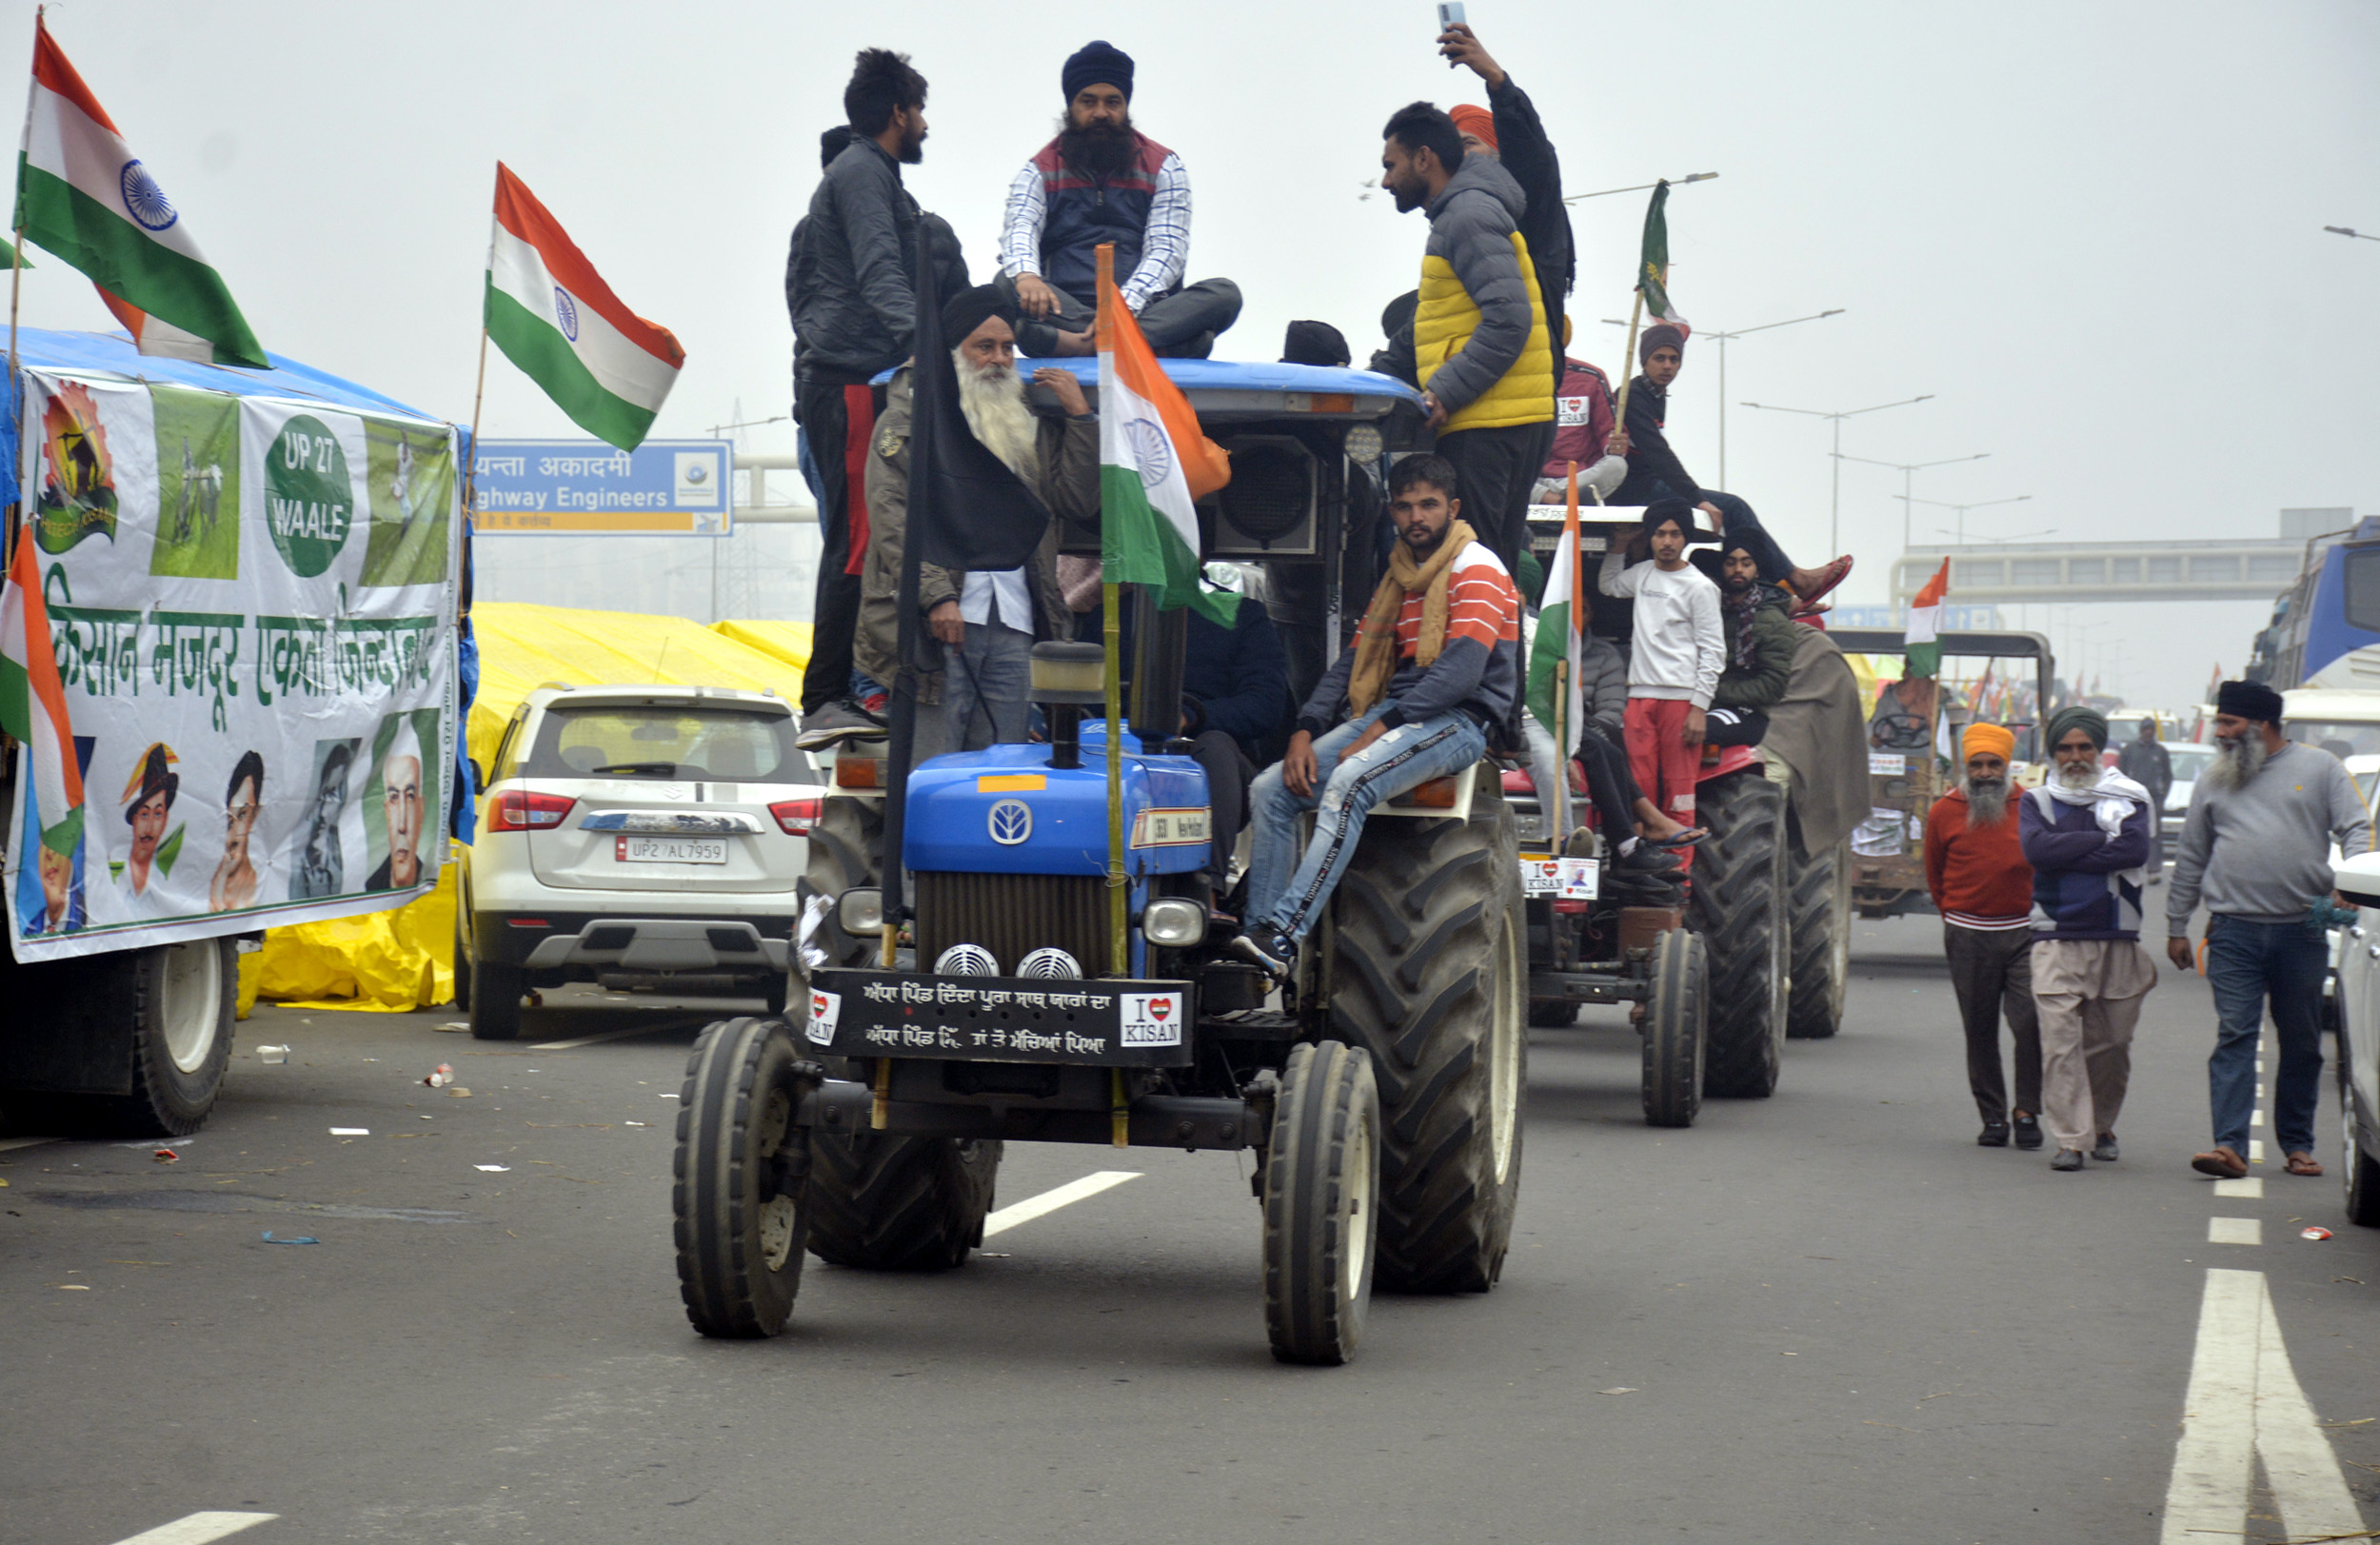 Protesting farmers enter Red Fort, man climbs flagstaff to hoist flag